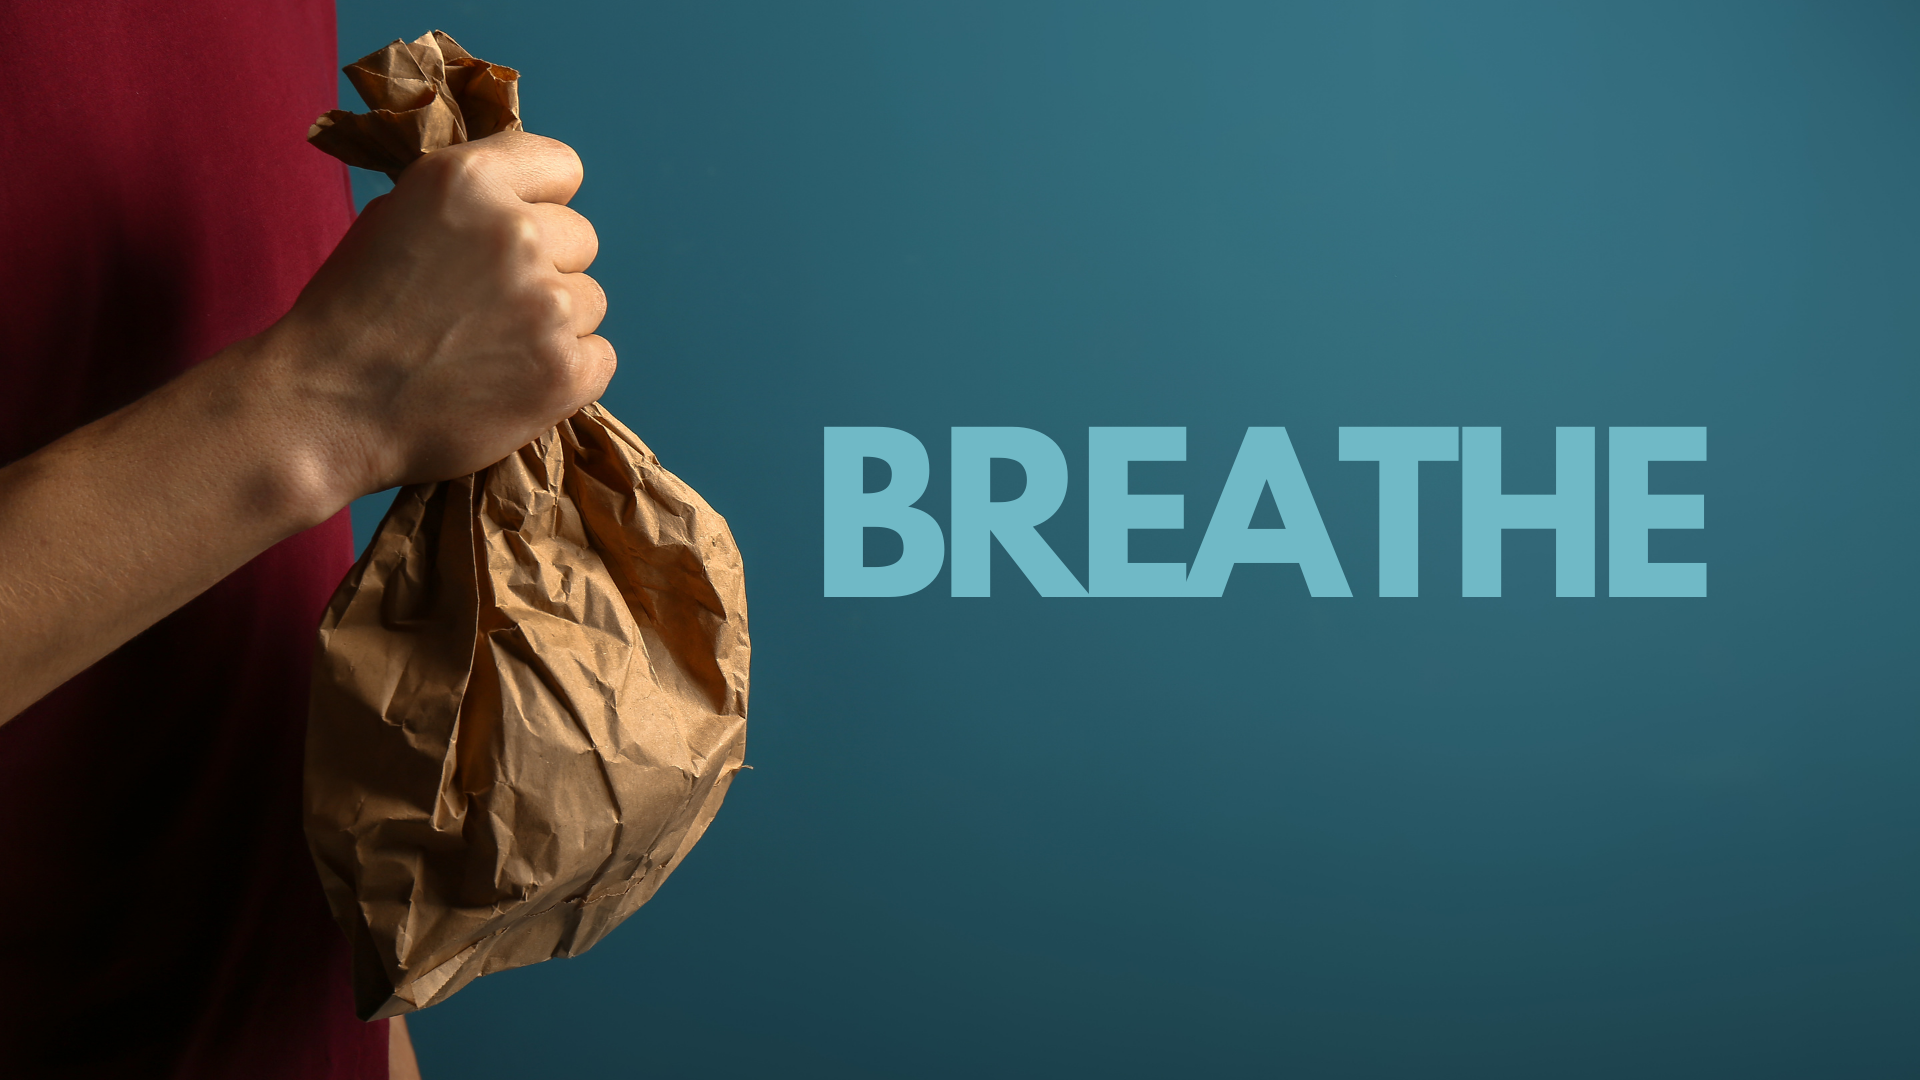 UCLA Health - Does breathing into a paper bag actually... | Facebook